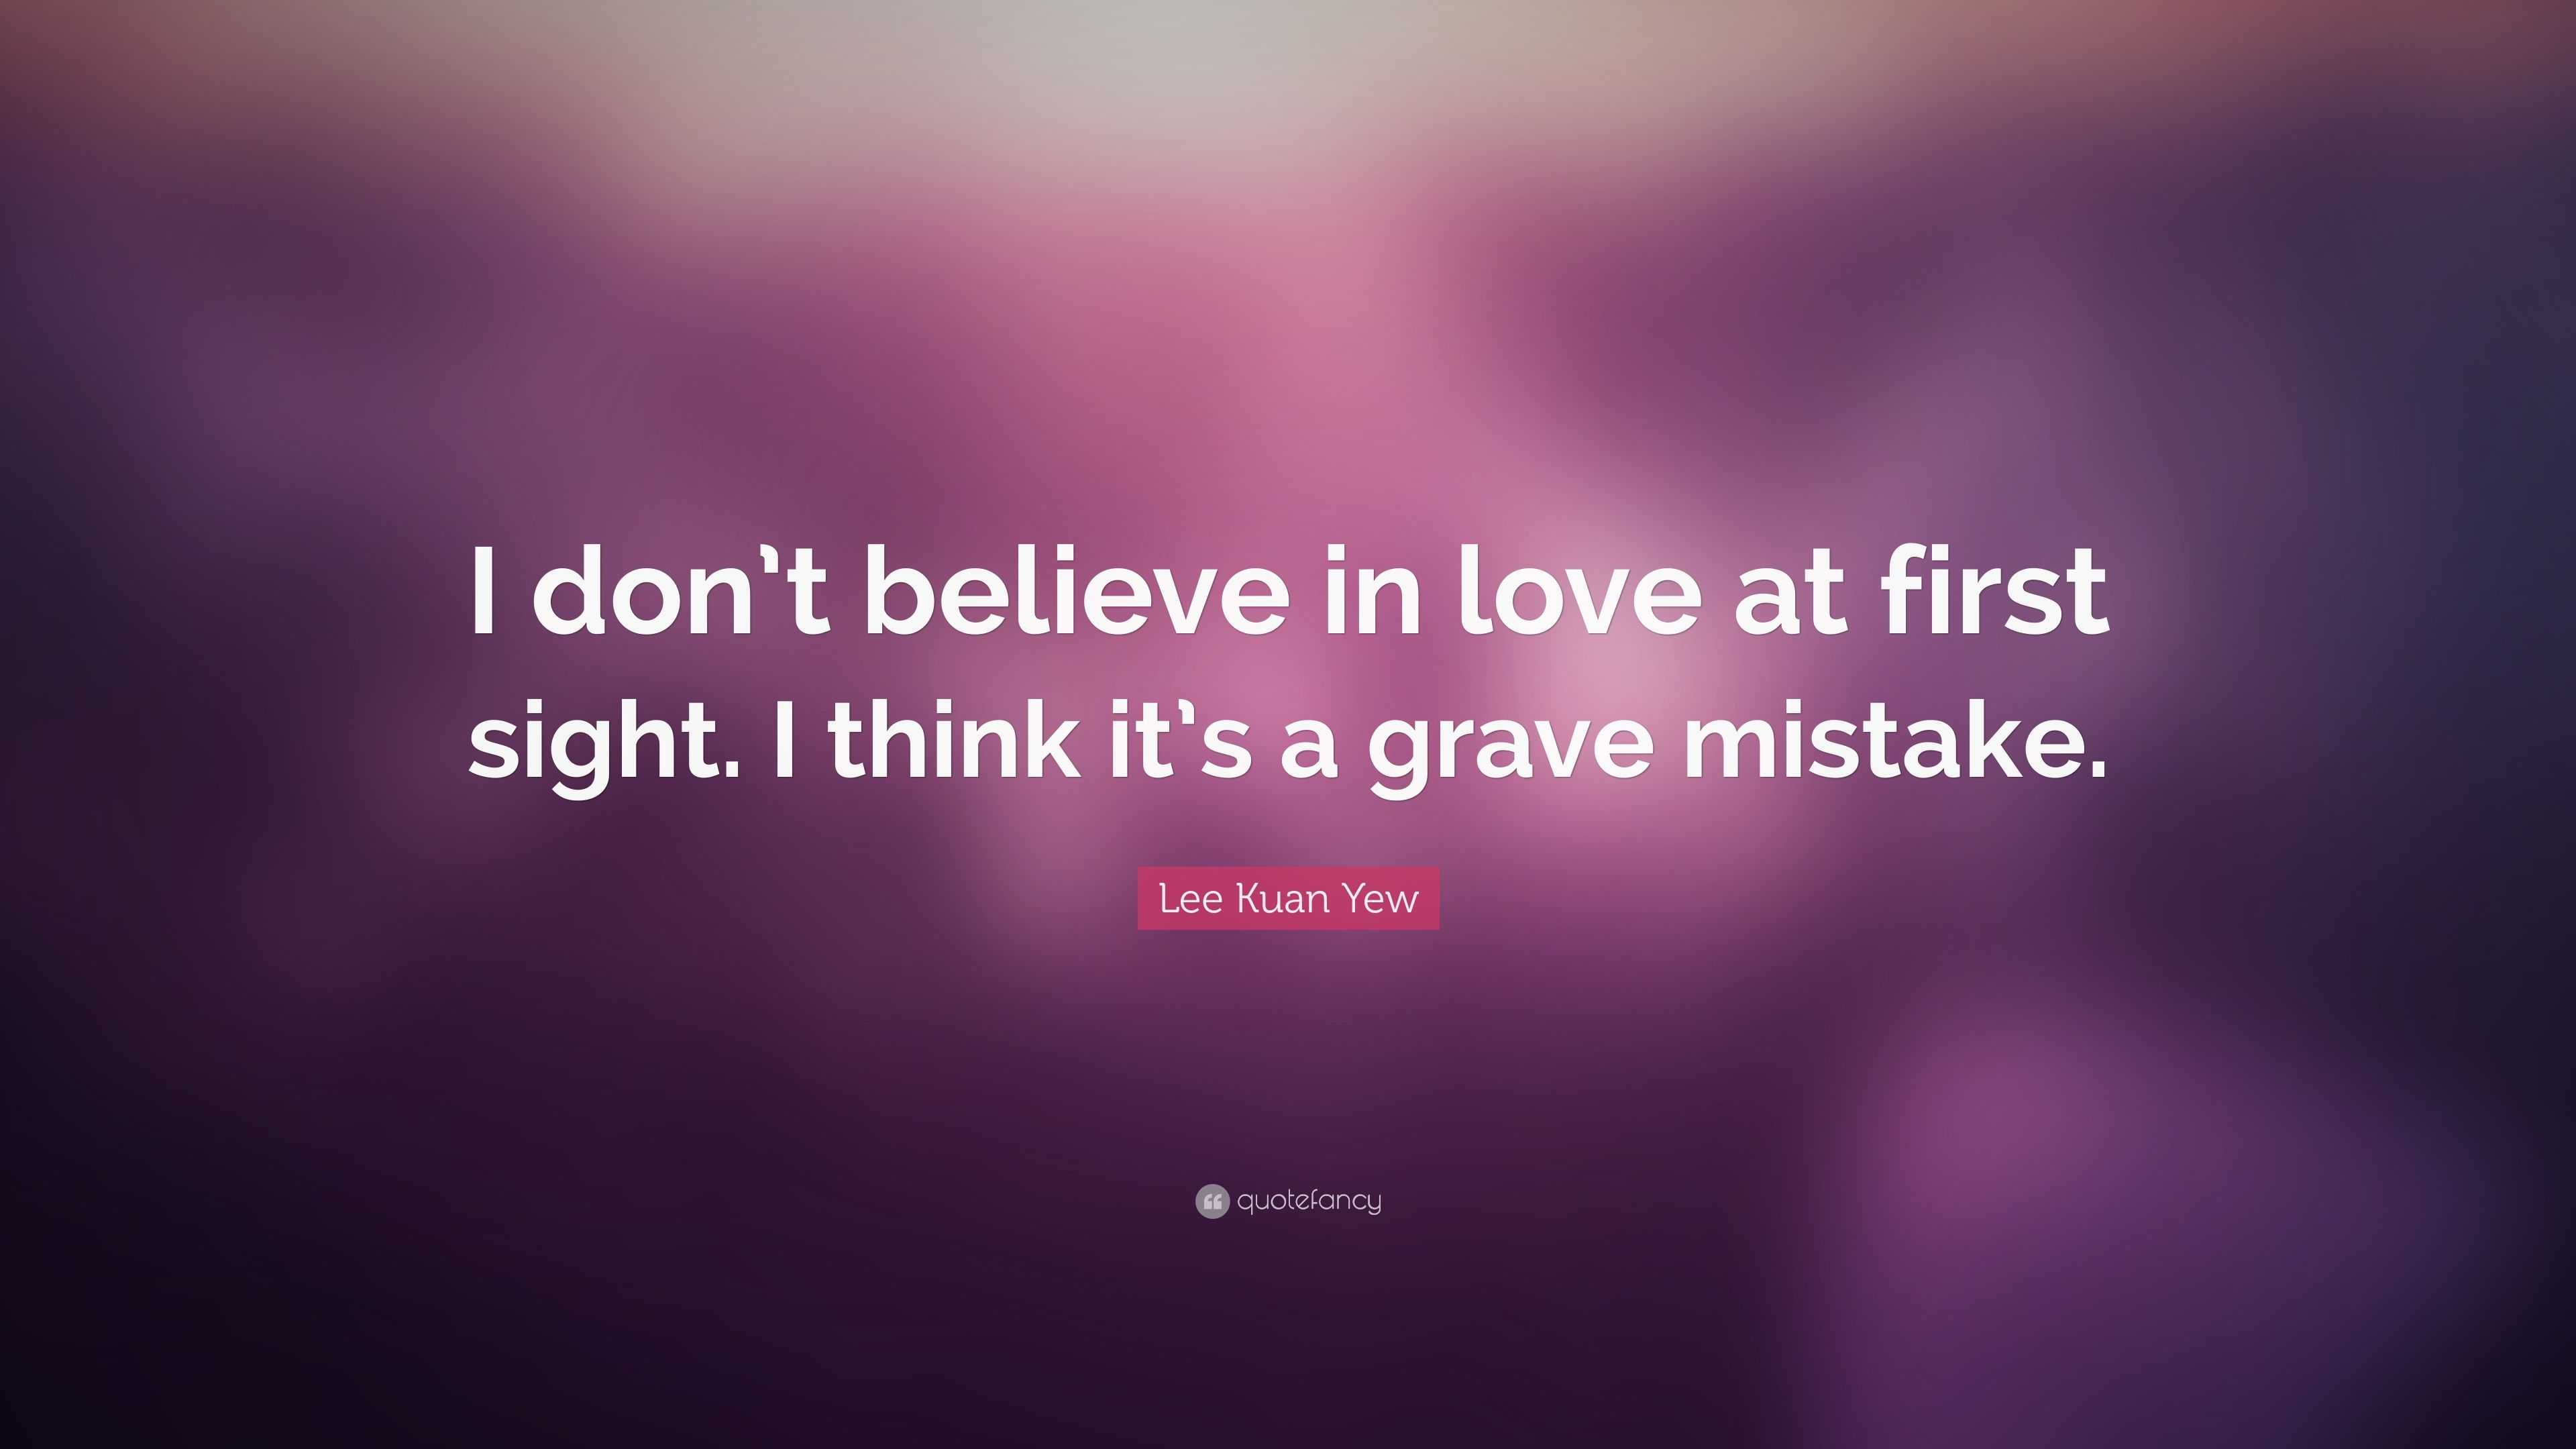 Lee Kuan Yew Quote “I don t believe in love at first sight